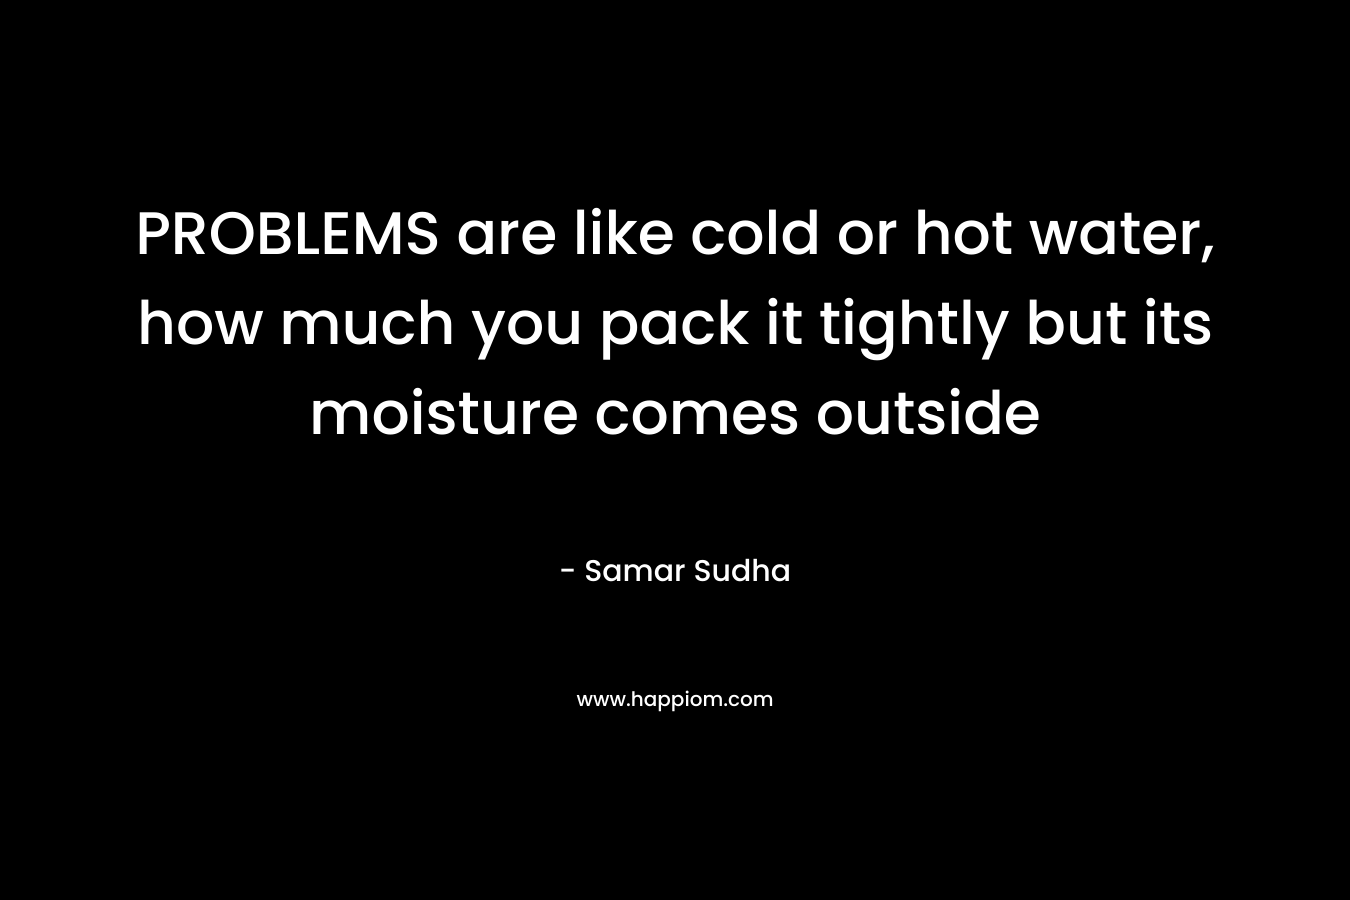 PROBLEMS are like cold or hot water, how much you pack it tightly but its moisture comes outside – Samar Sudha